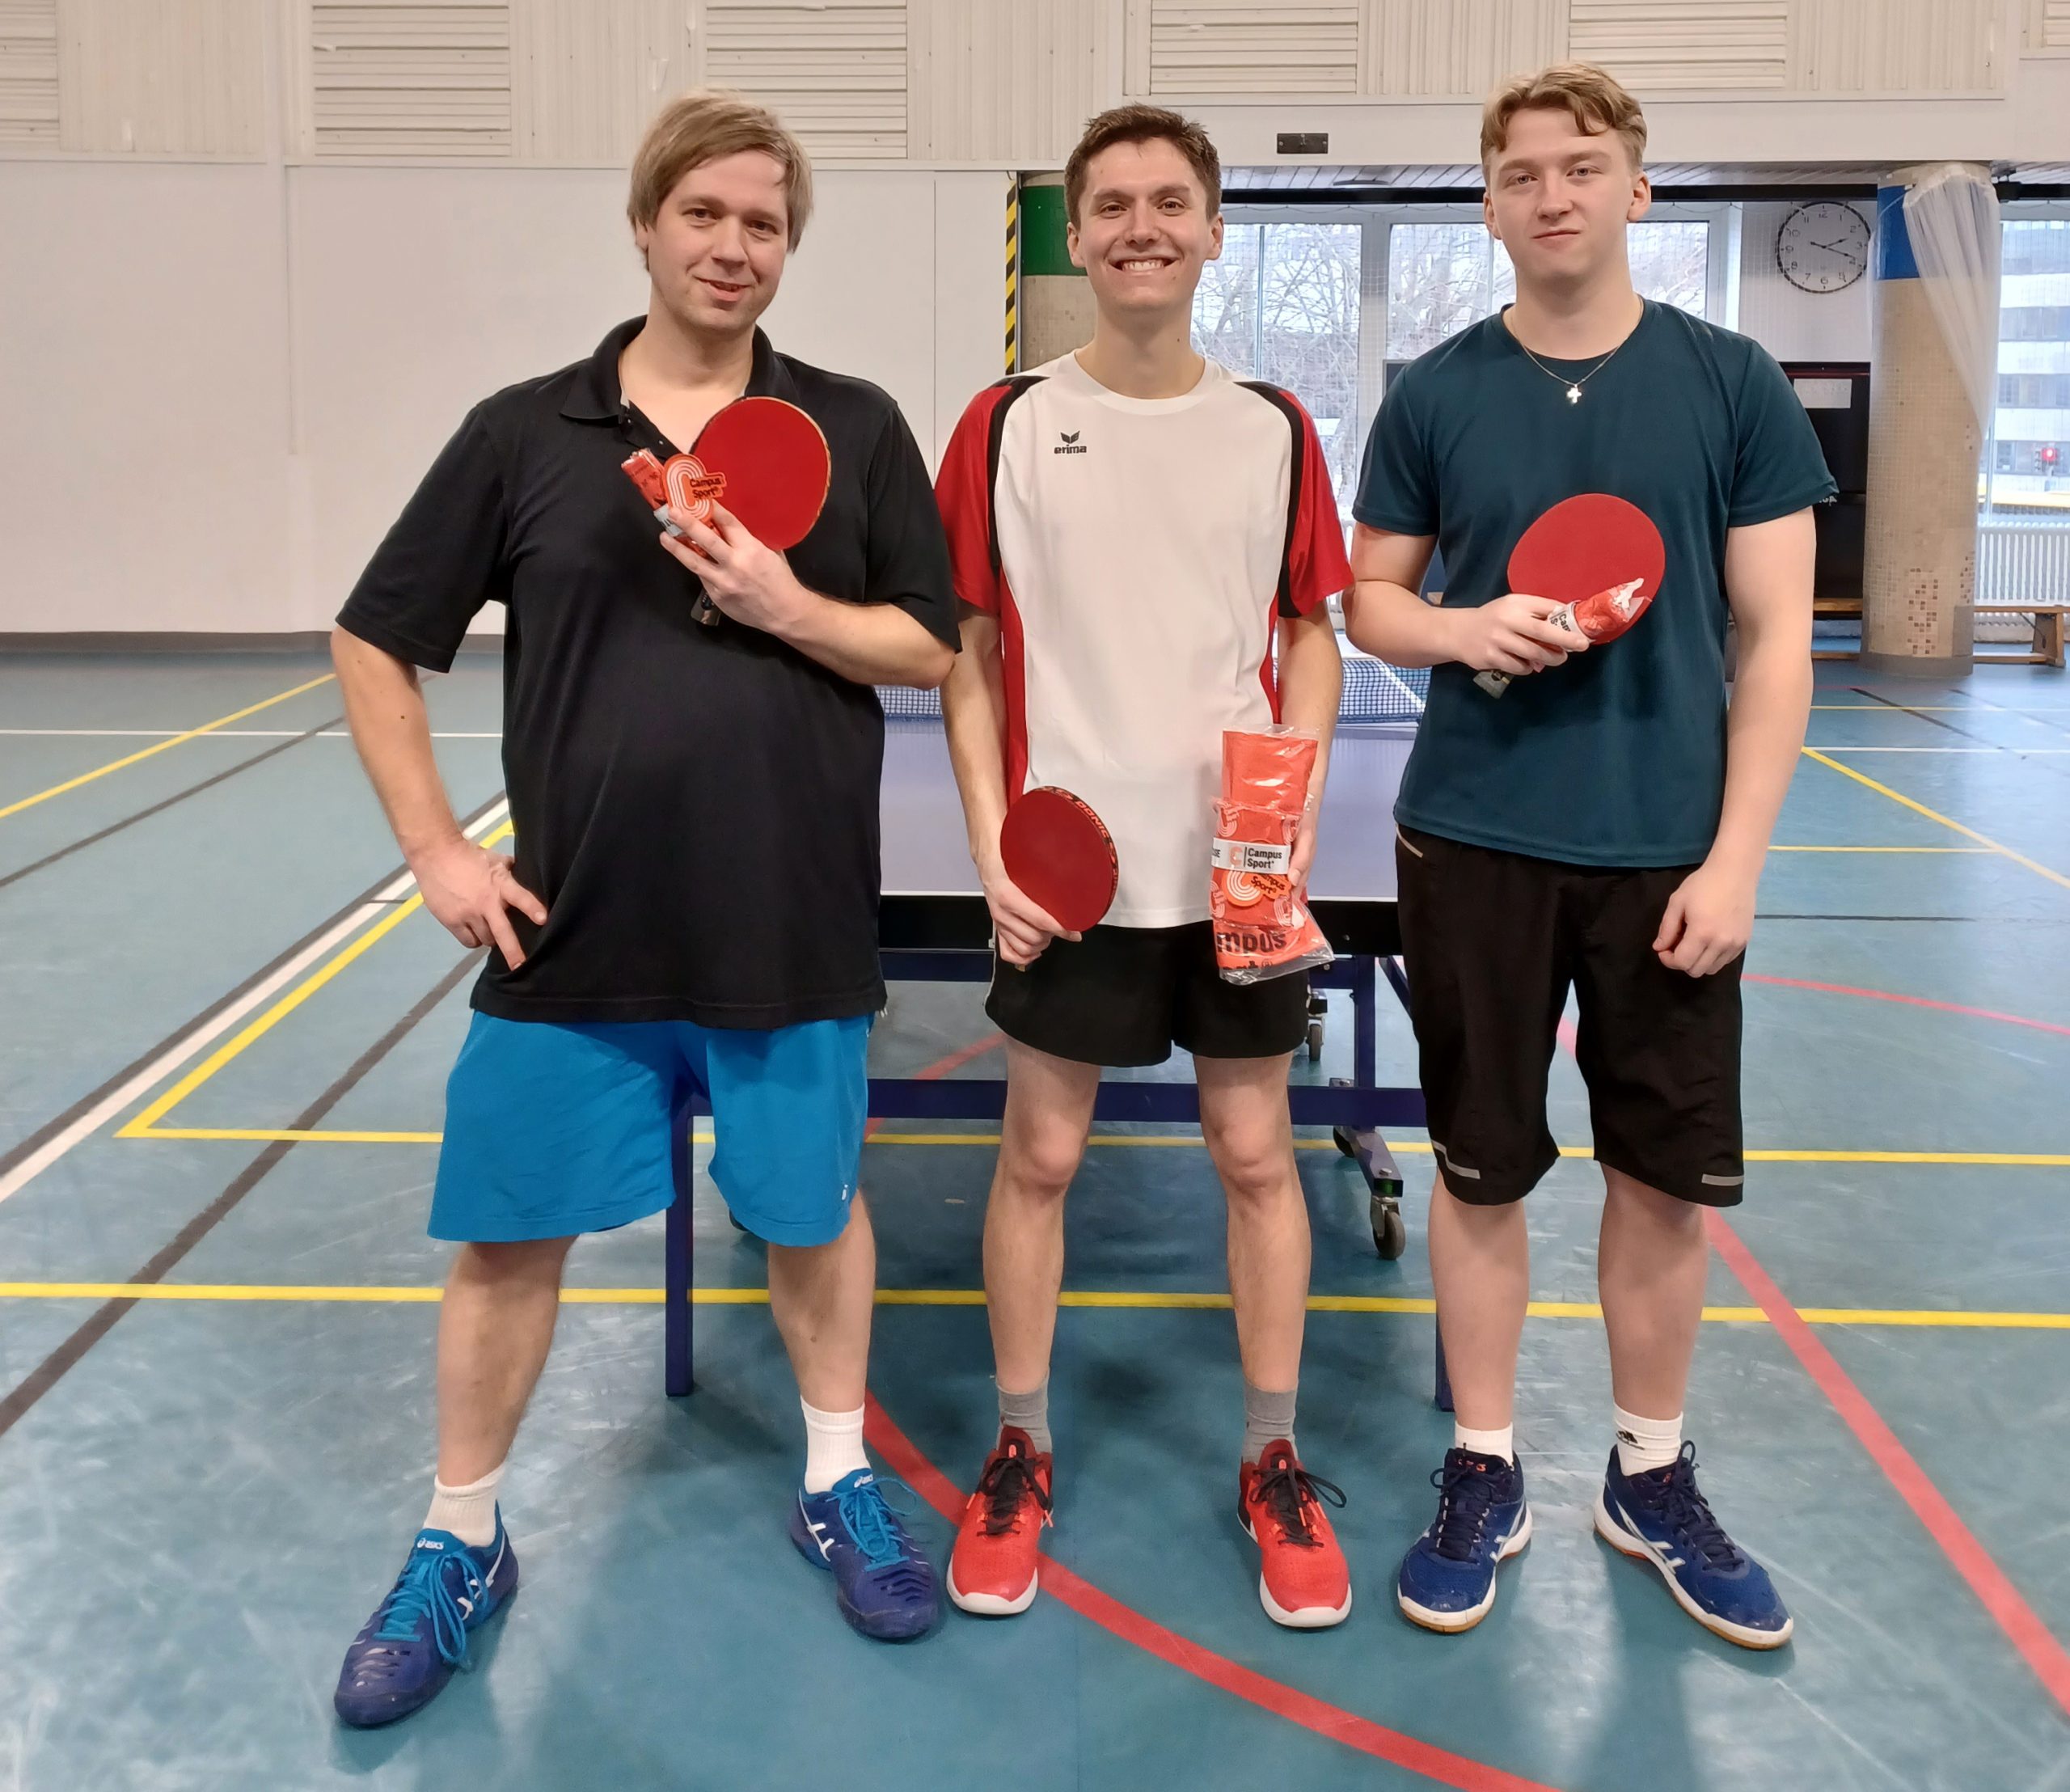 The winner of men's singles series is Michael Stahl with Pasi Tolvanen who came second and Leevi Toivonen who came third. The players are in Iskeri sports hall, in front of a table tennis table, holding raquets and trophies.